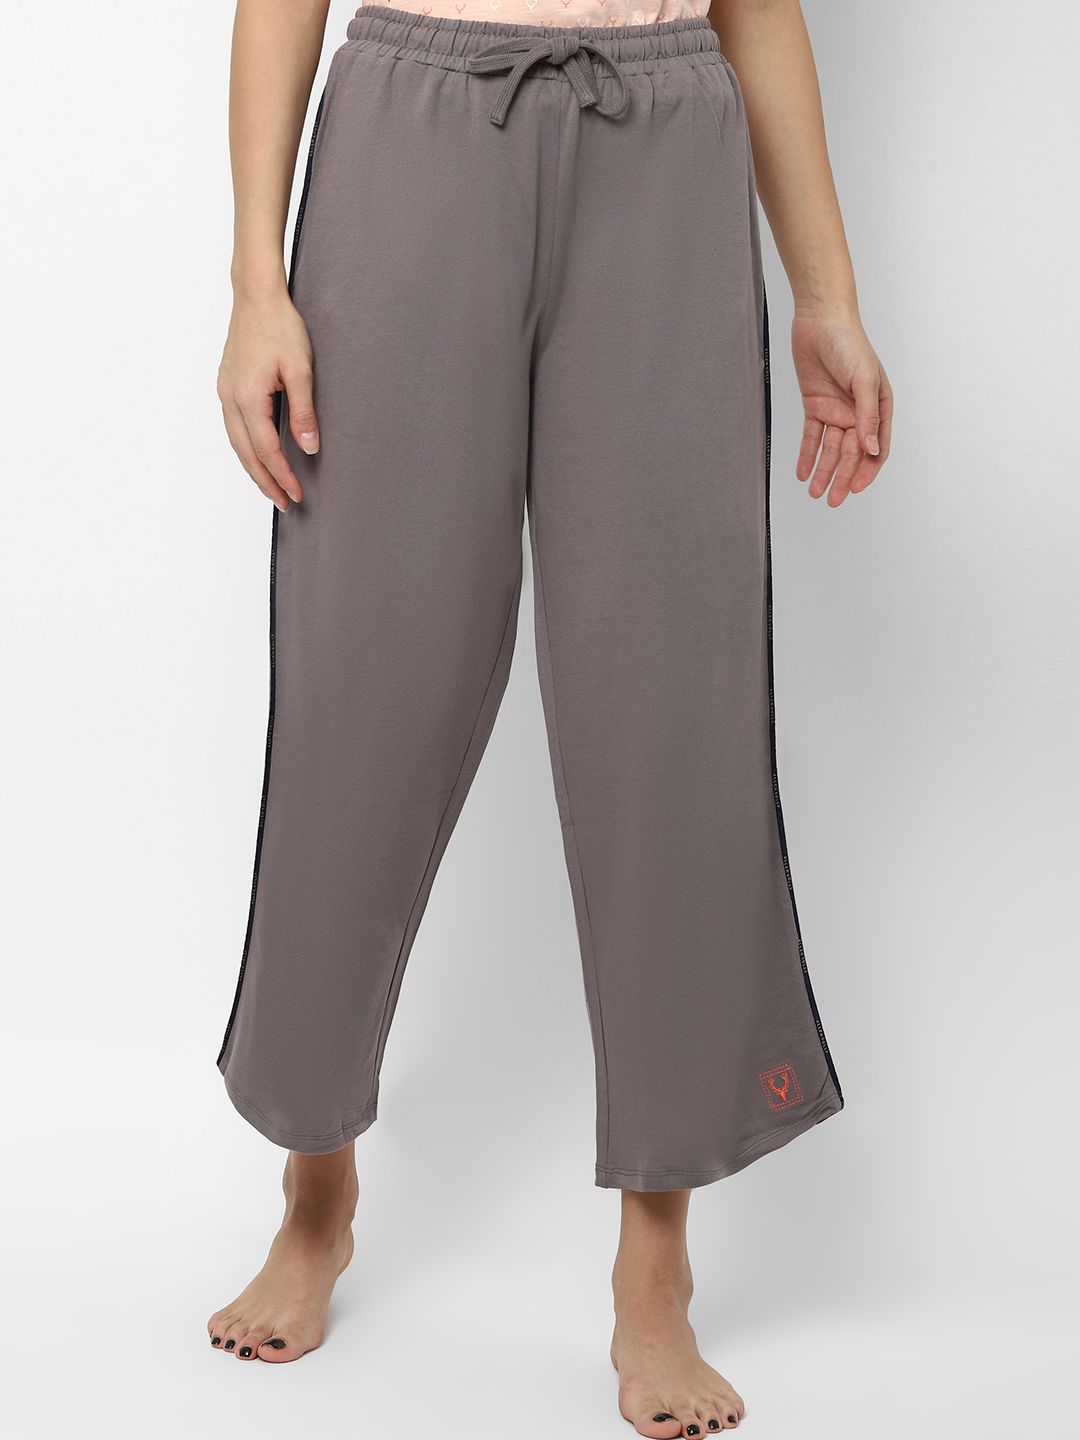 Allen Solly Women Grey Solid Lounge Pants Price in India